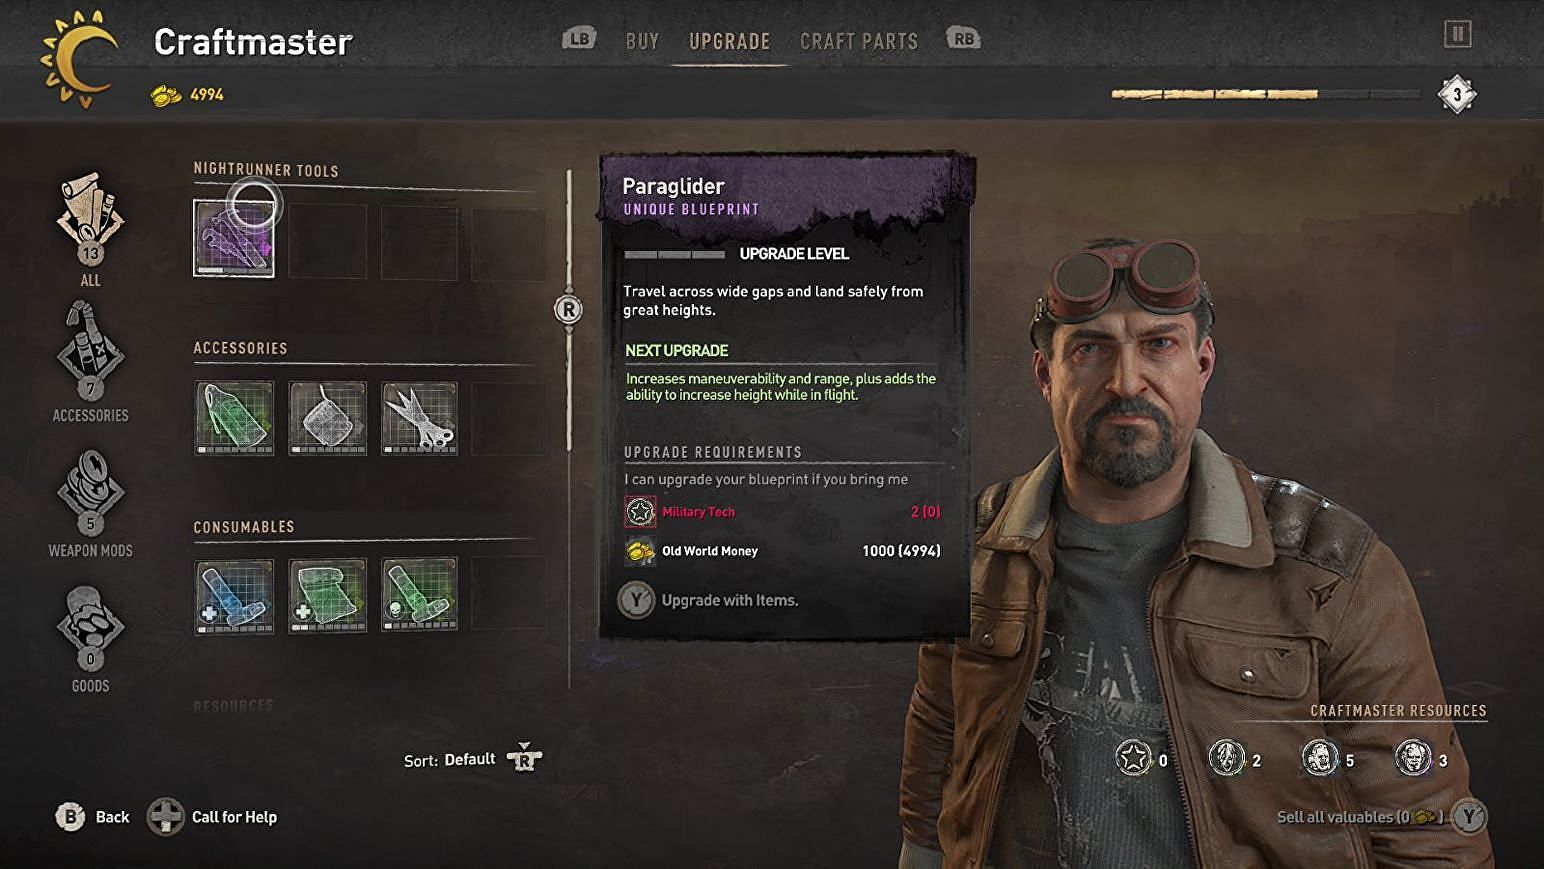 The Craftmaster can upgrade your items and tools in Dying Light 2 (Image via Techland)